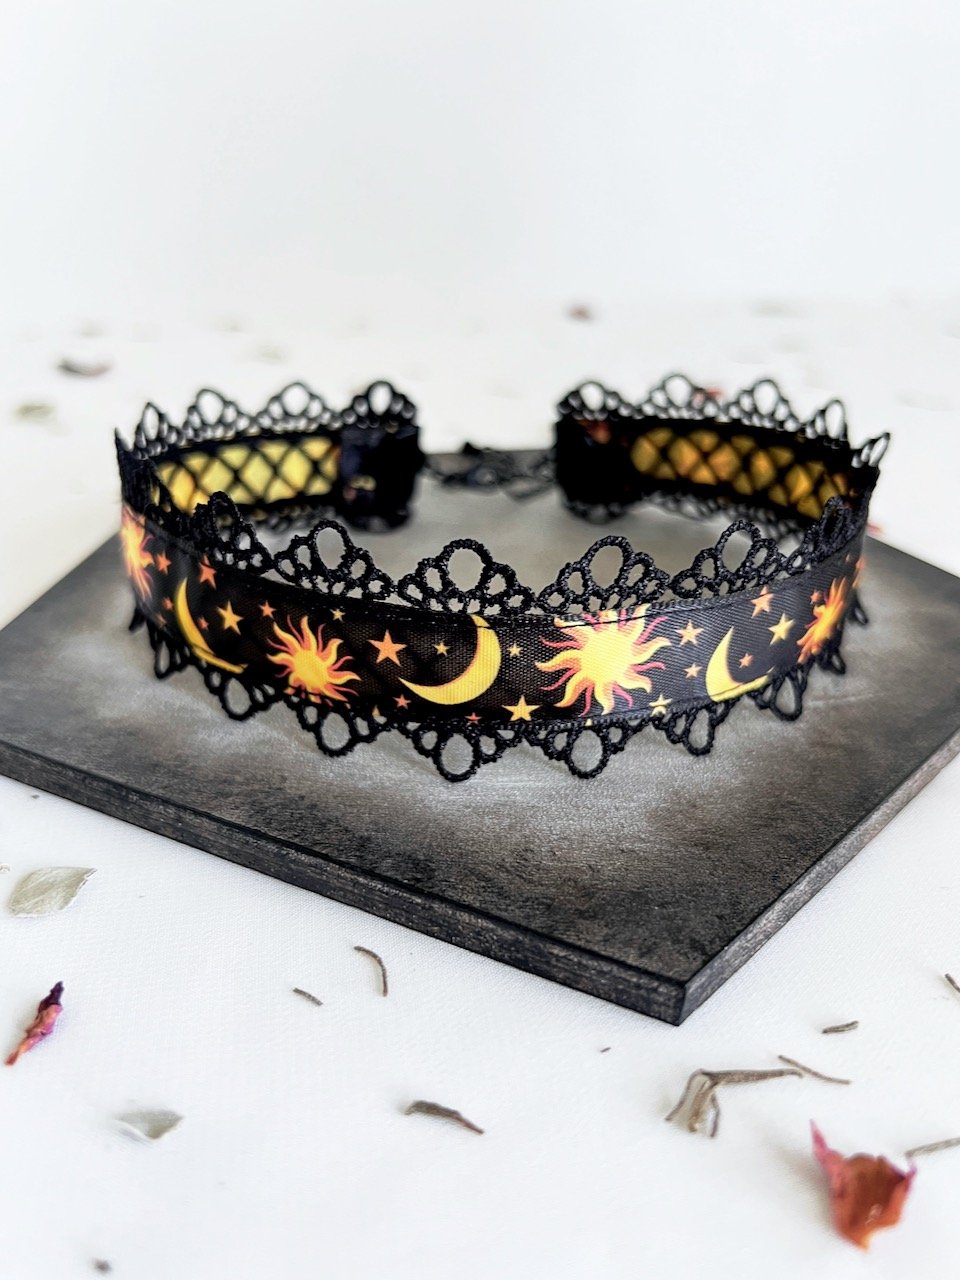 Swoon as Possible Black Lace Choker Necklace